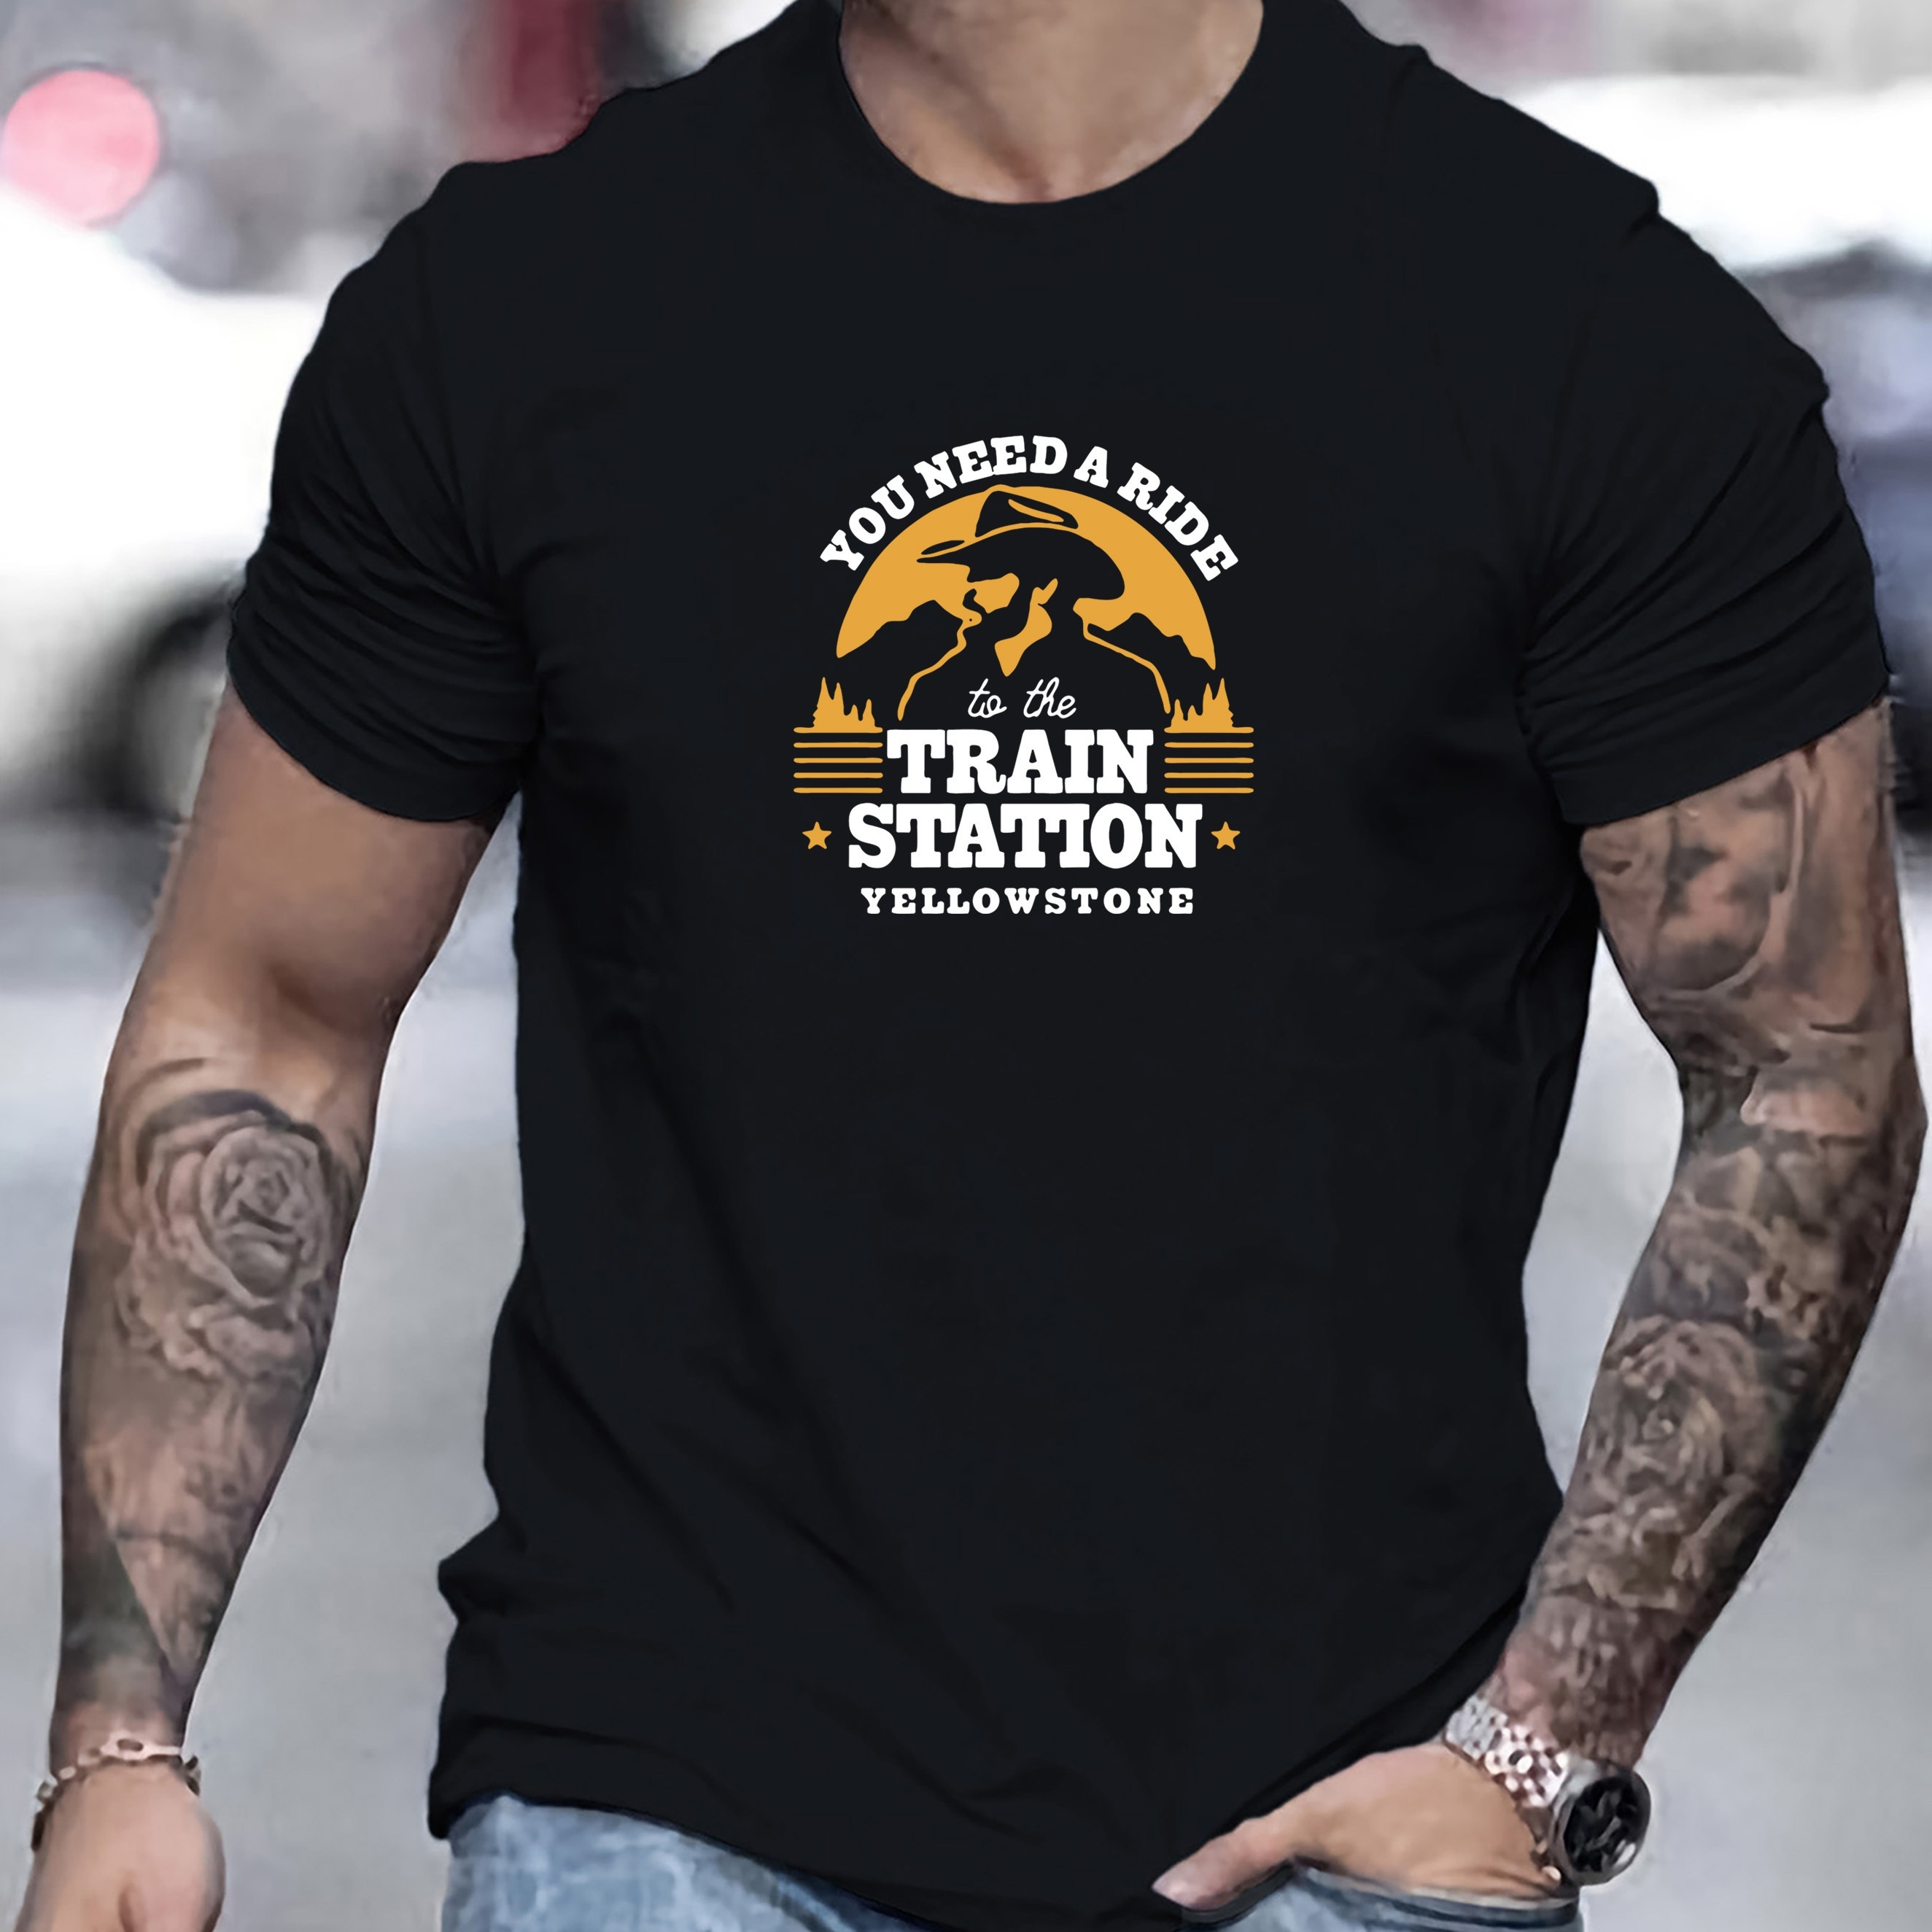 

Train Station Print Crew Neck T-shirt For Men, Casual Short Sleeve Top, Men's Clothing